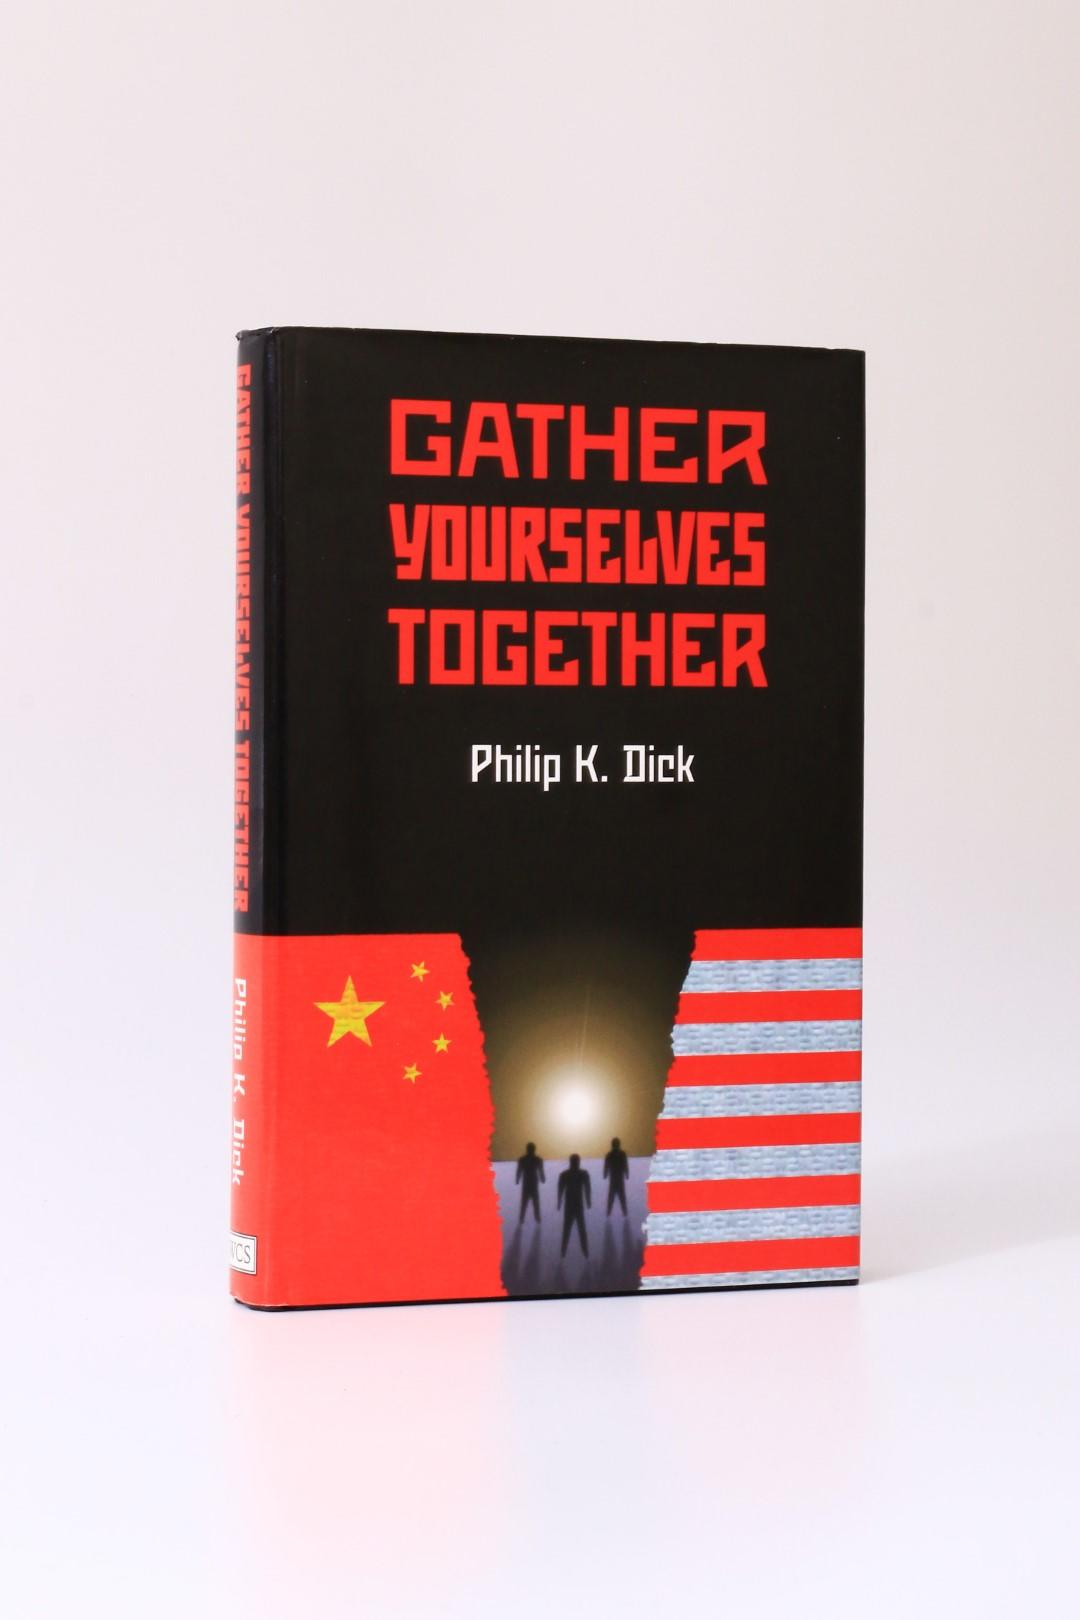 Philip K. Dick - Gather Yourselves Together - WCS Books, 1994, First Edition.